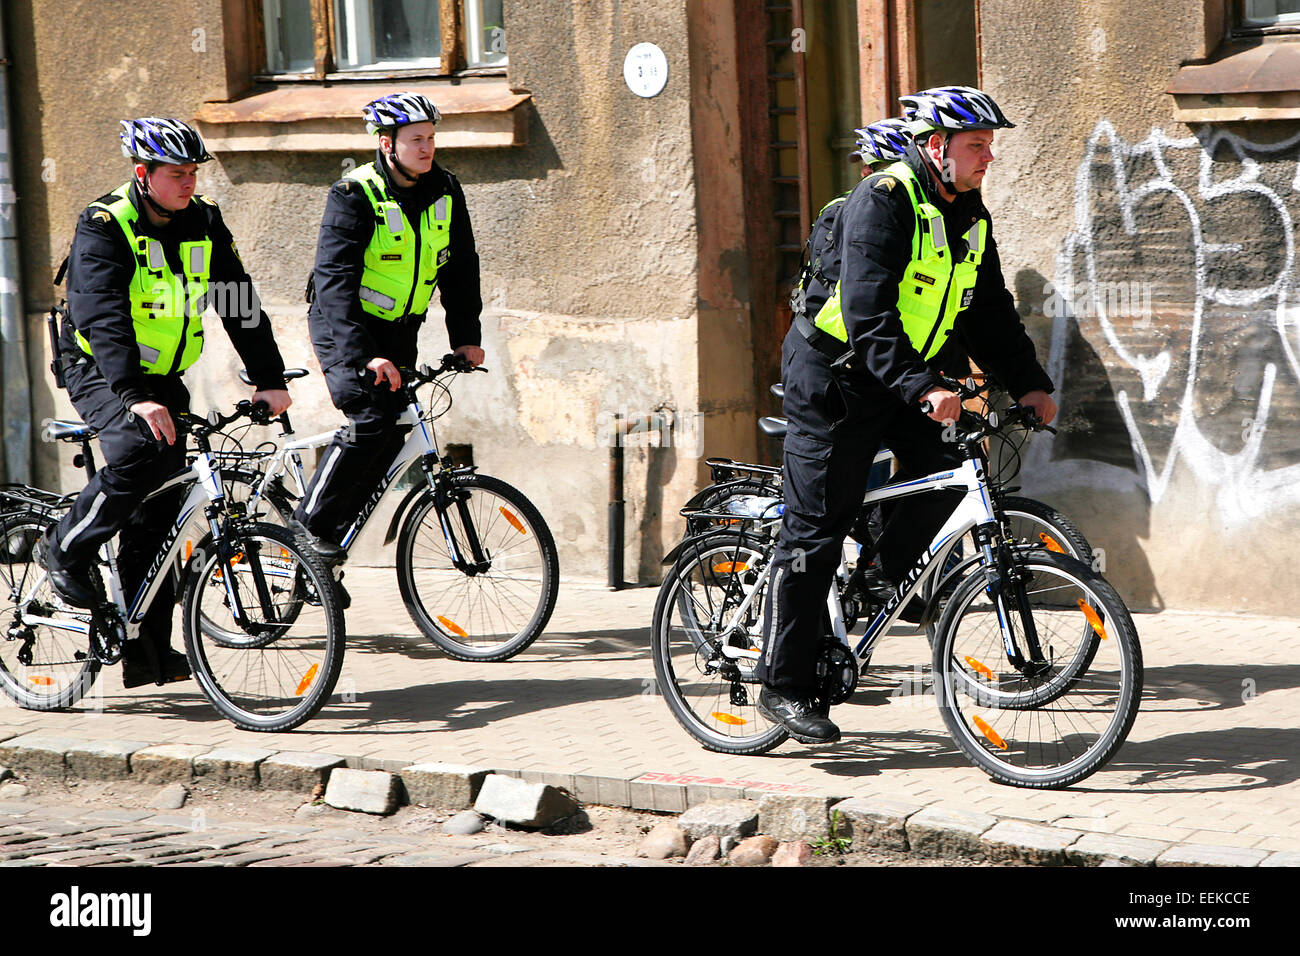 policemen police on bicycles city Stock Photo